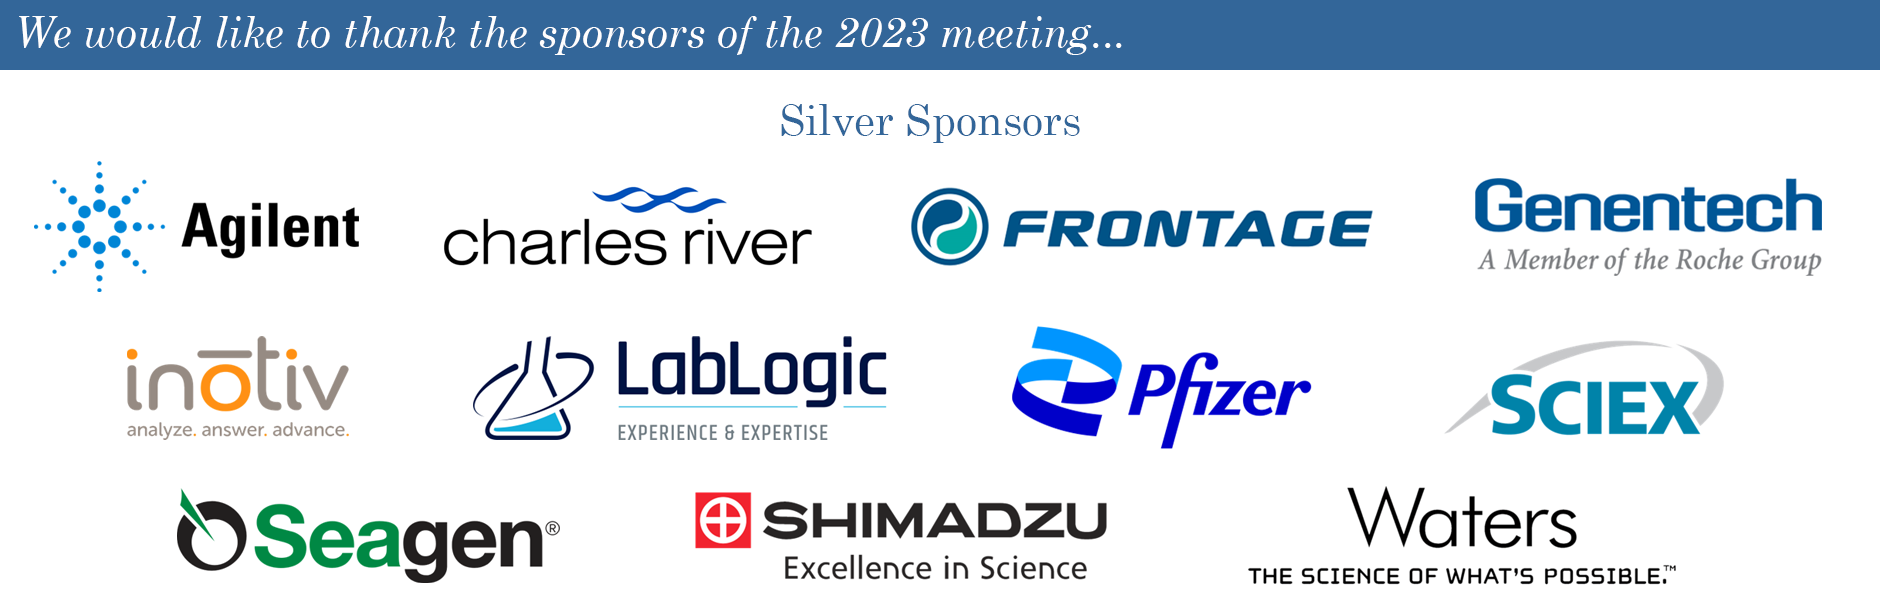 2023_silver_sponsors.png